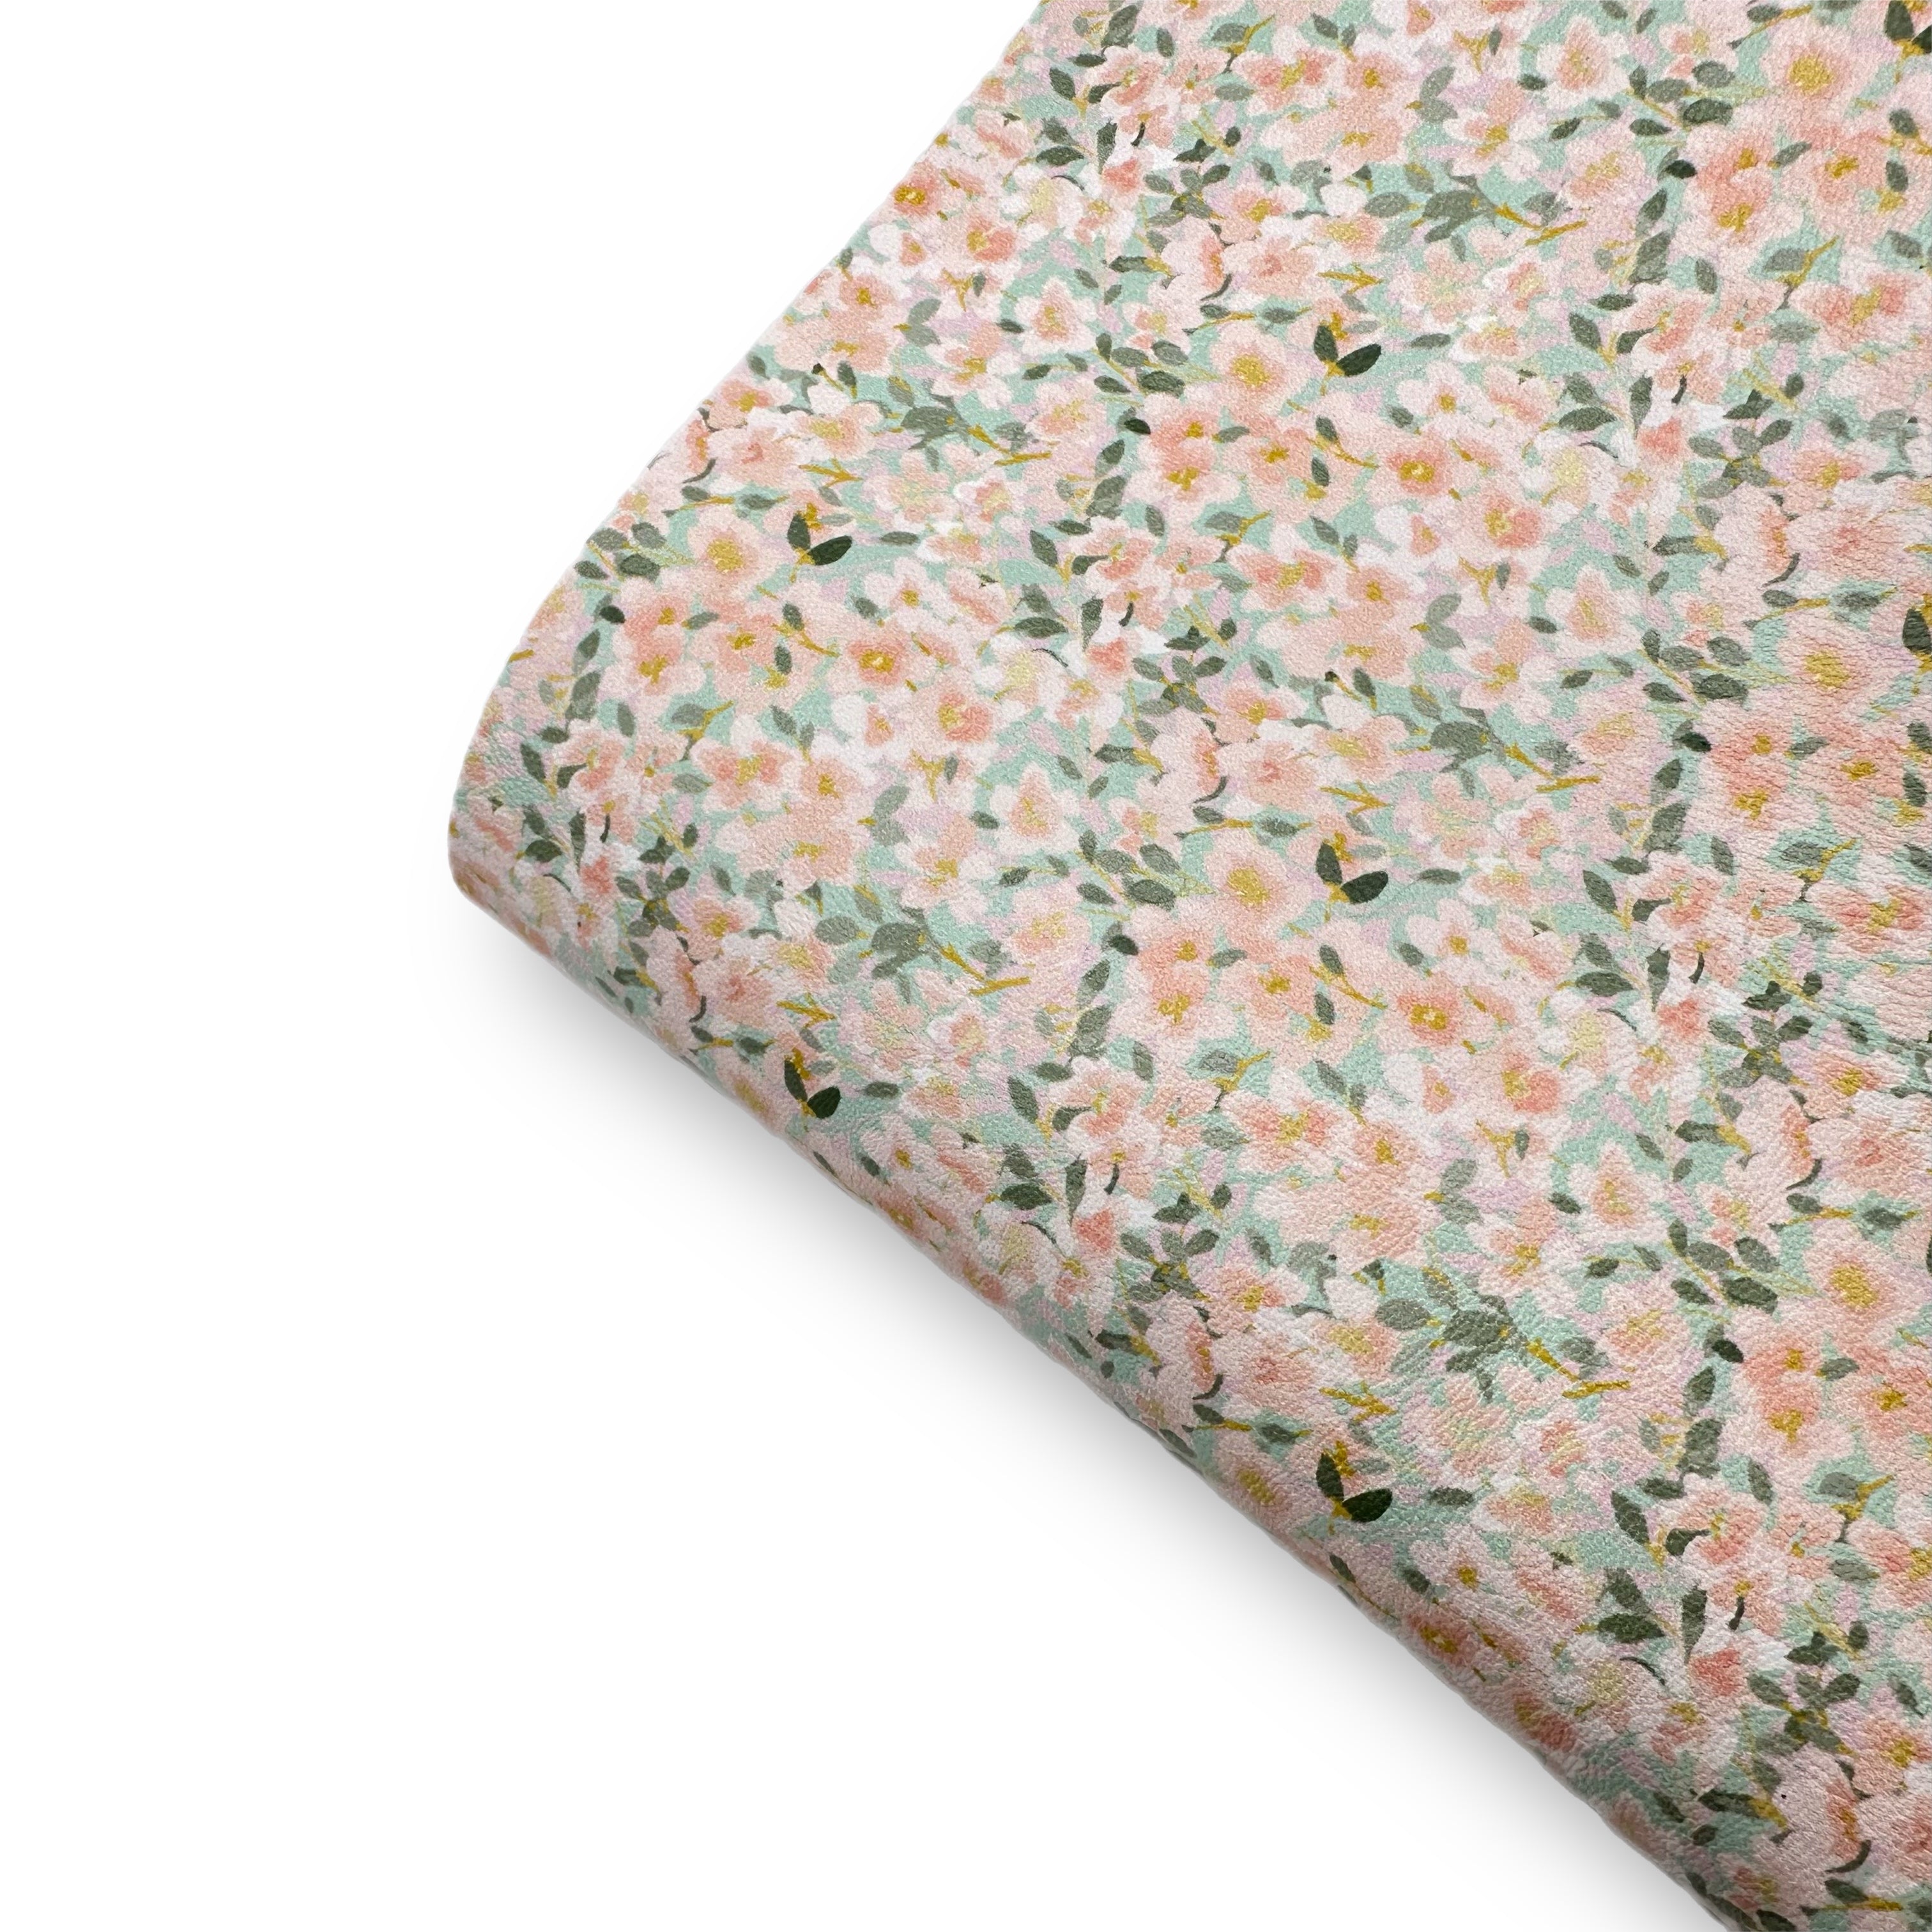 Peach & Mint Florals Premium Faux Leather Fabric Sheets on